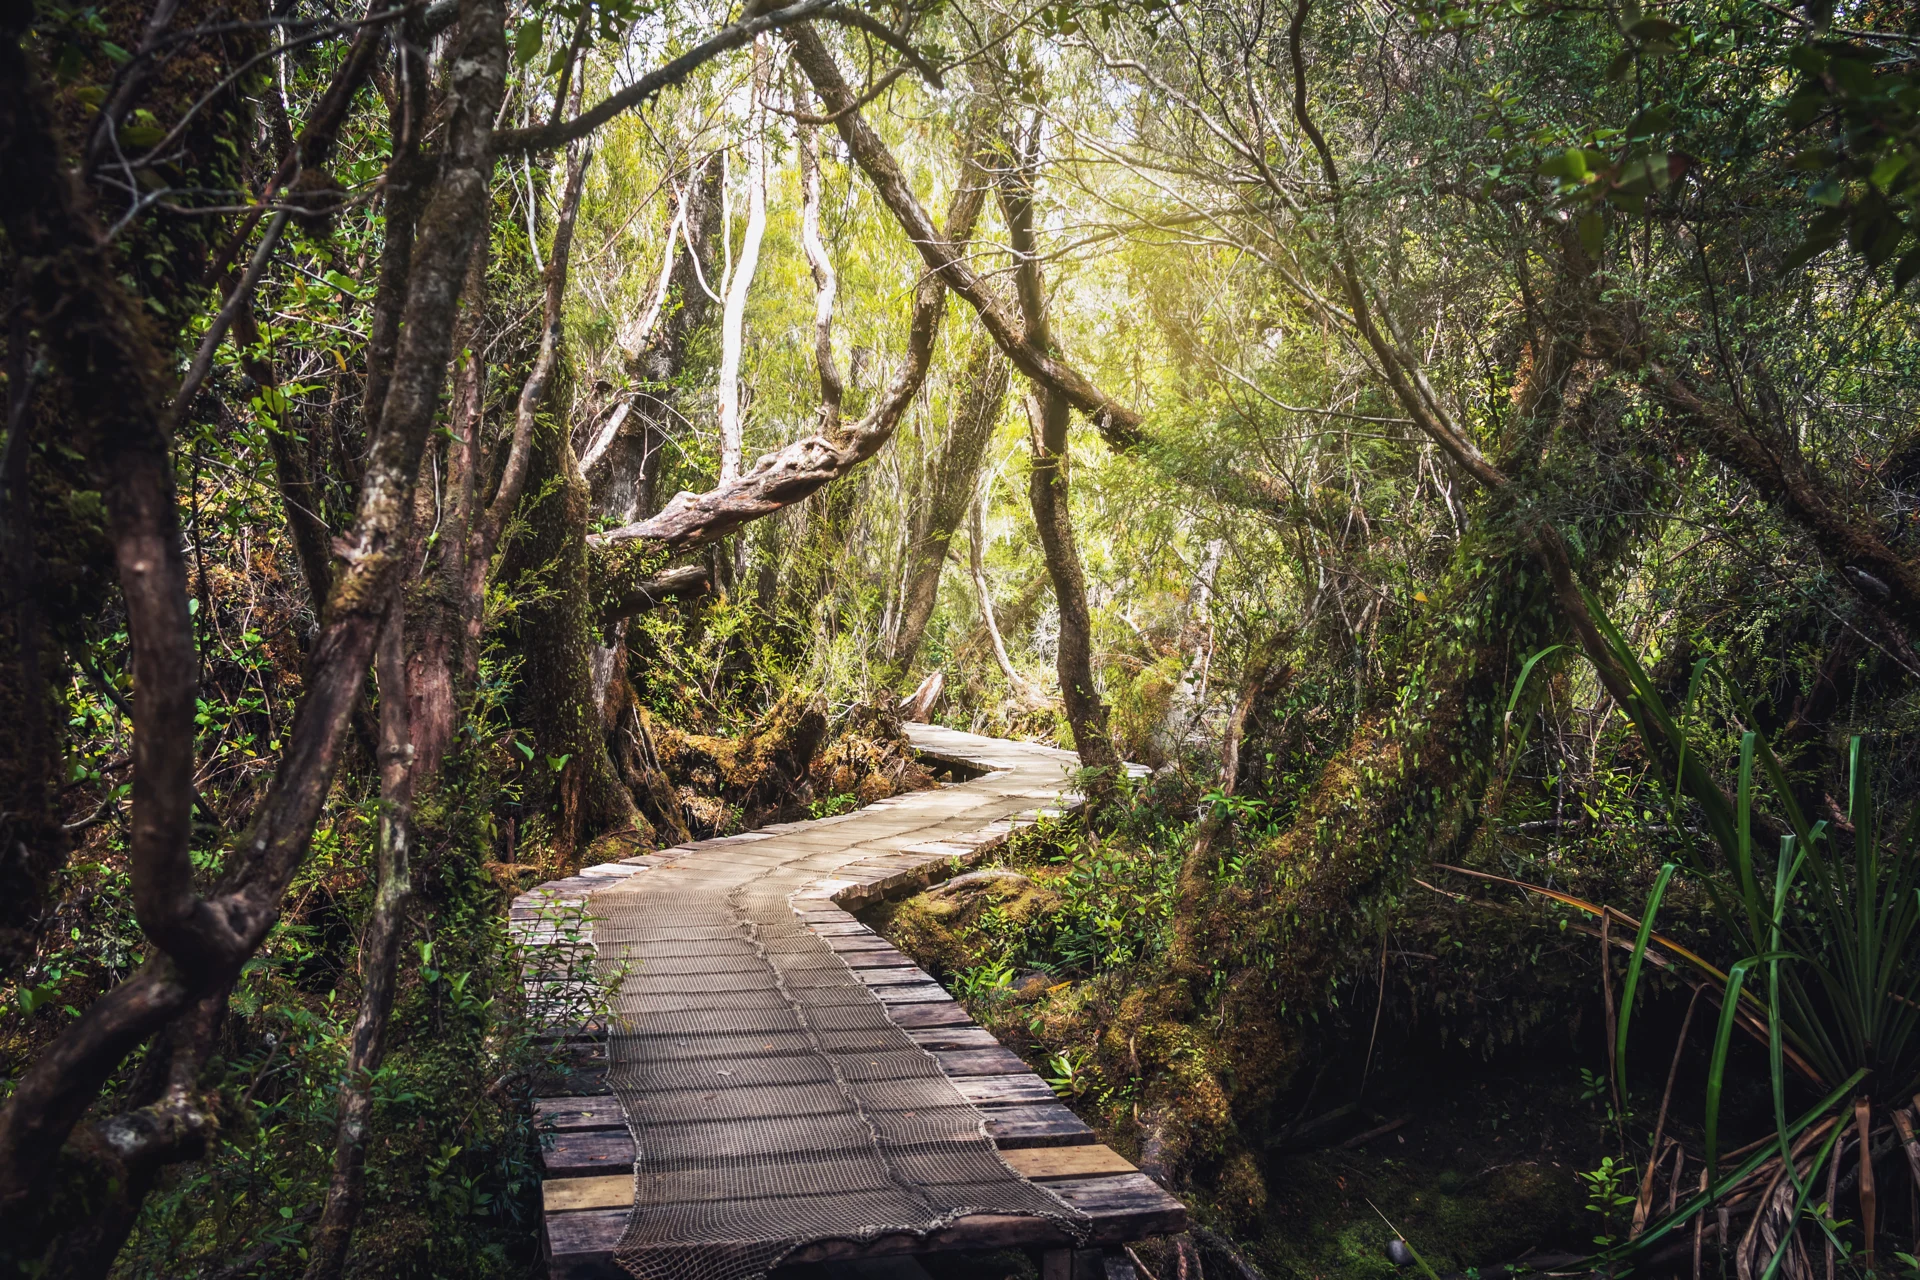  Chiloé National Park is dominated by the Valdivian rain forest with a dense forest formed by trees, Evergreen, shrubs and climbing plants.  Credit:  Shutterstock / Hurtigruten